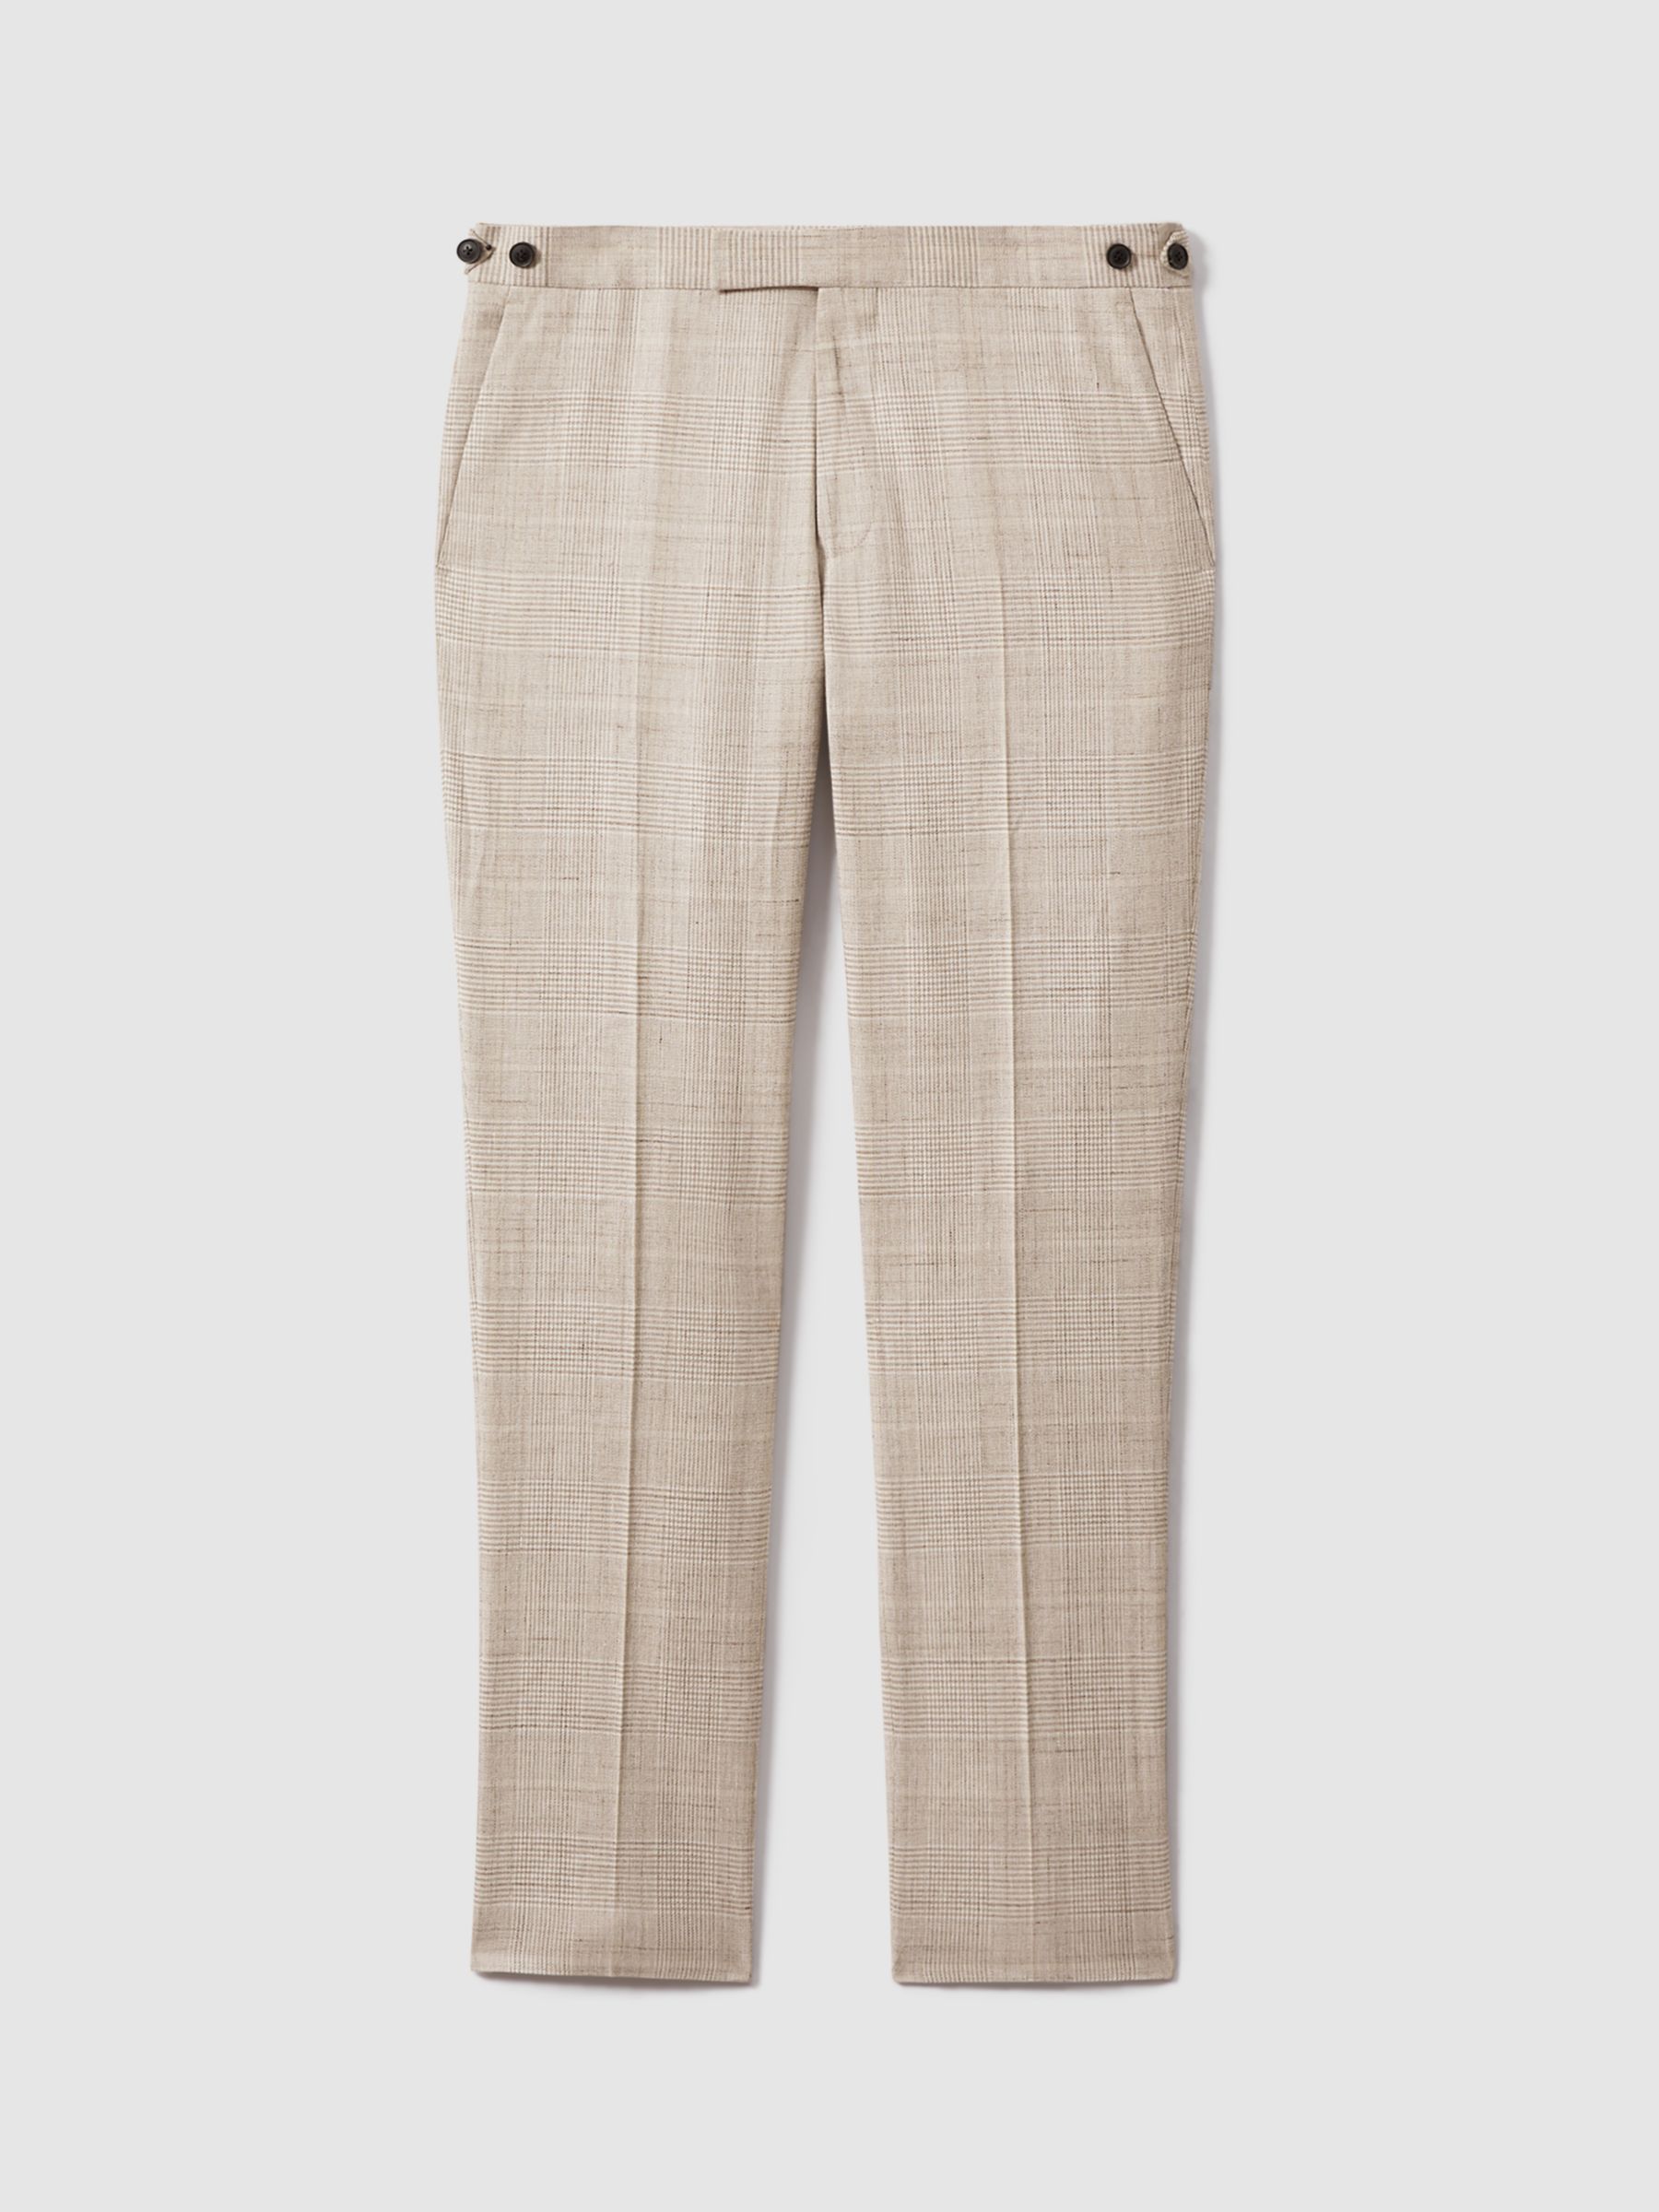 Buy Reiss Boxhill Linen Blend Suit Trousers, Oatmeal Online at johnlewis.com